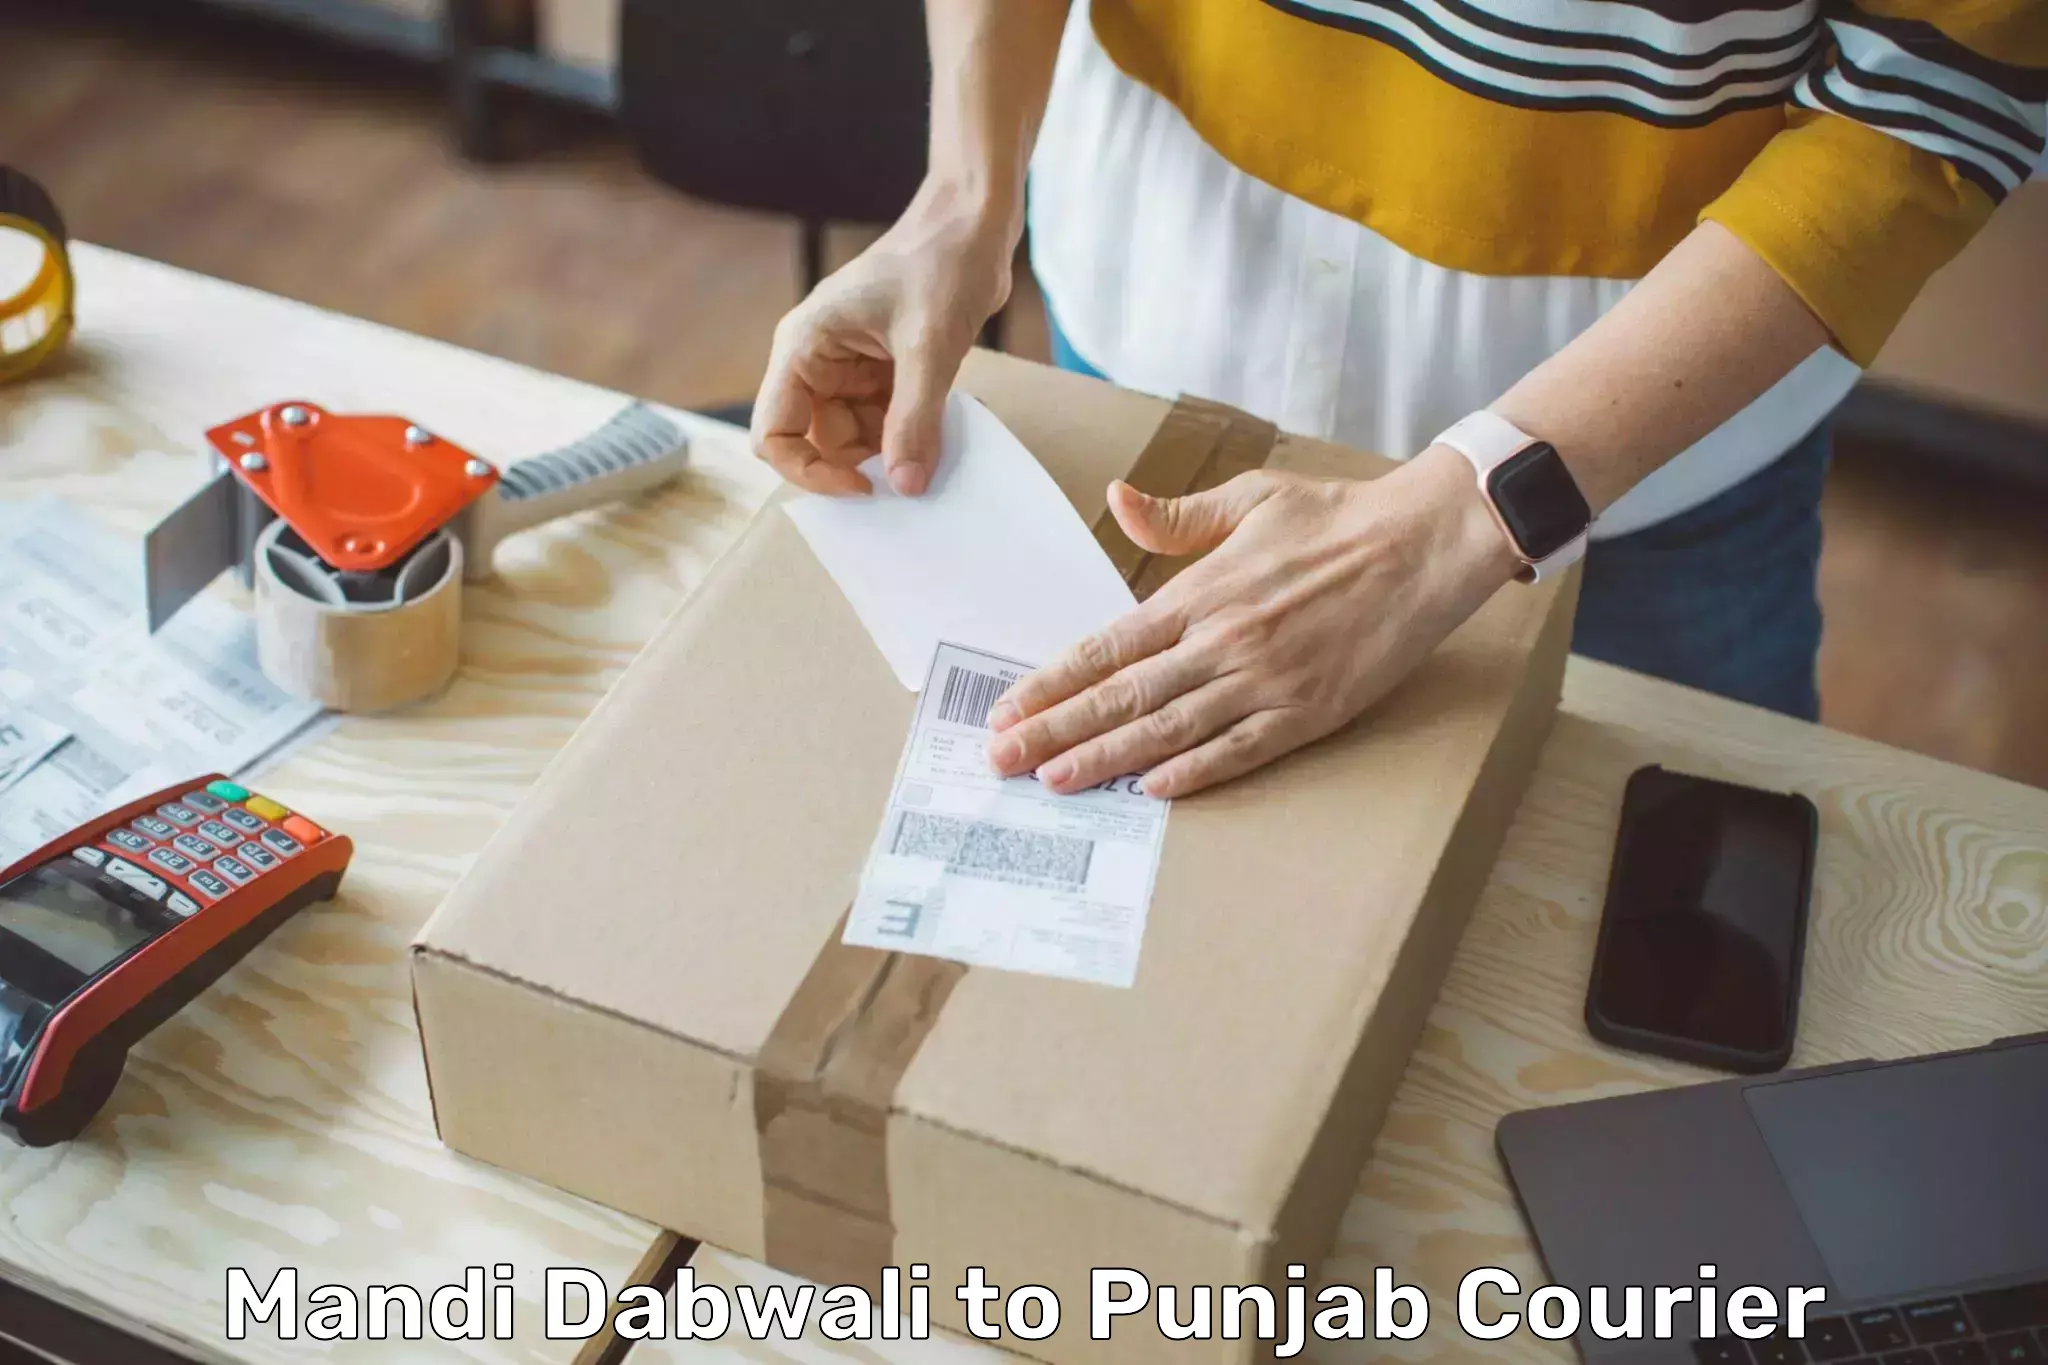 Reliable courier service Mandi Dabwali to Amritsar